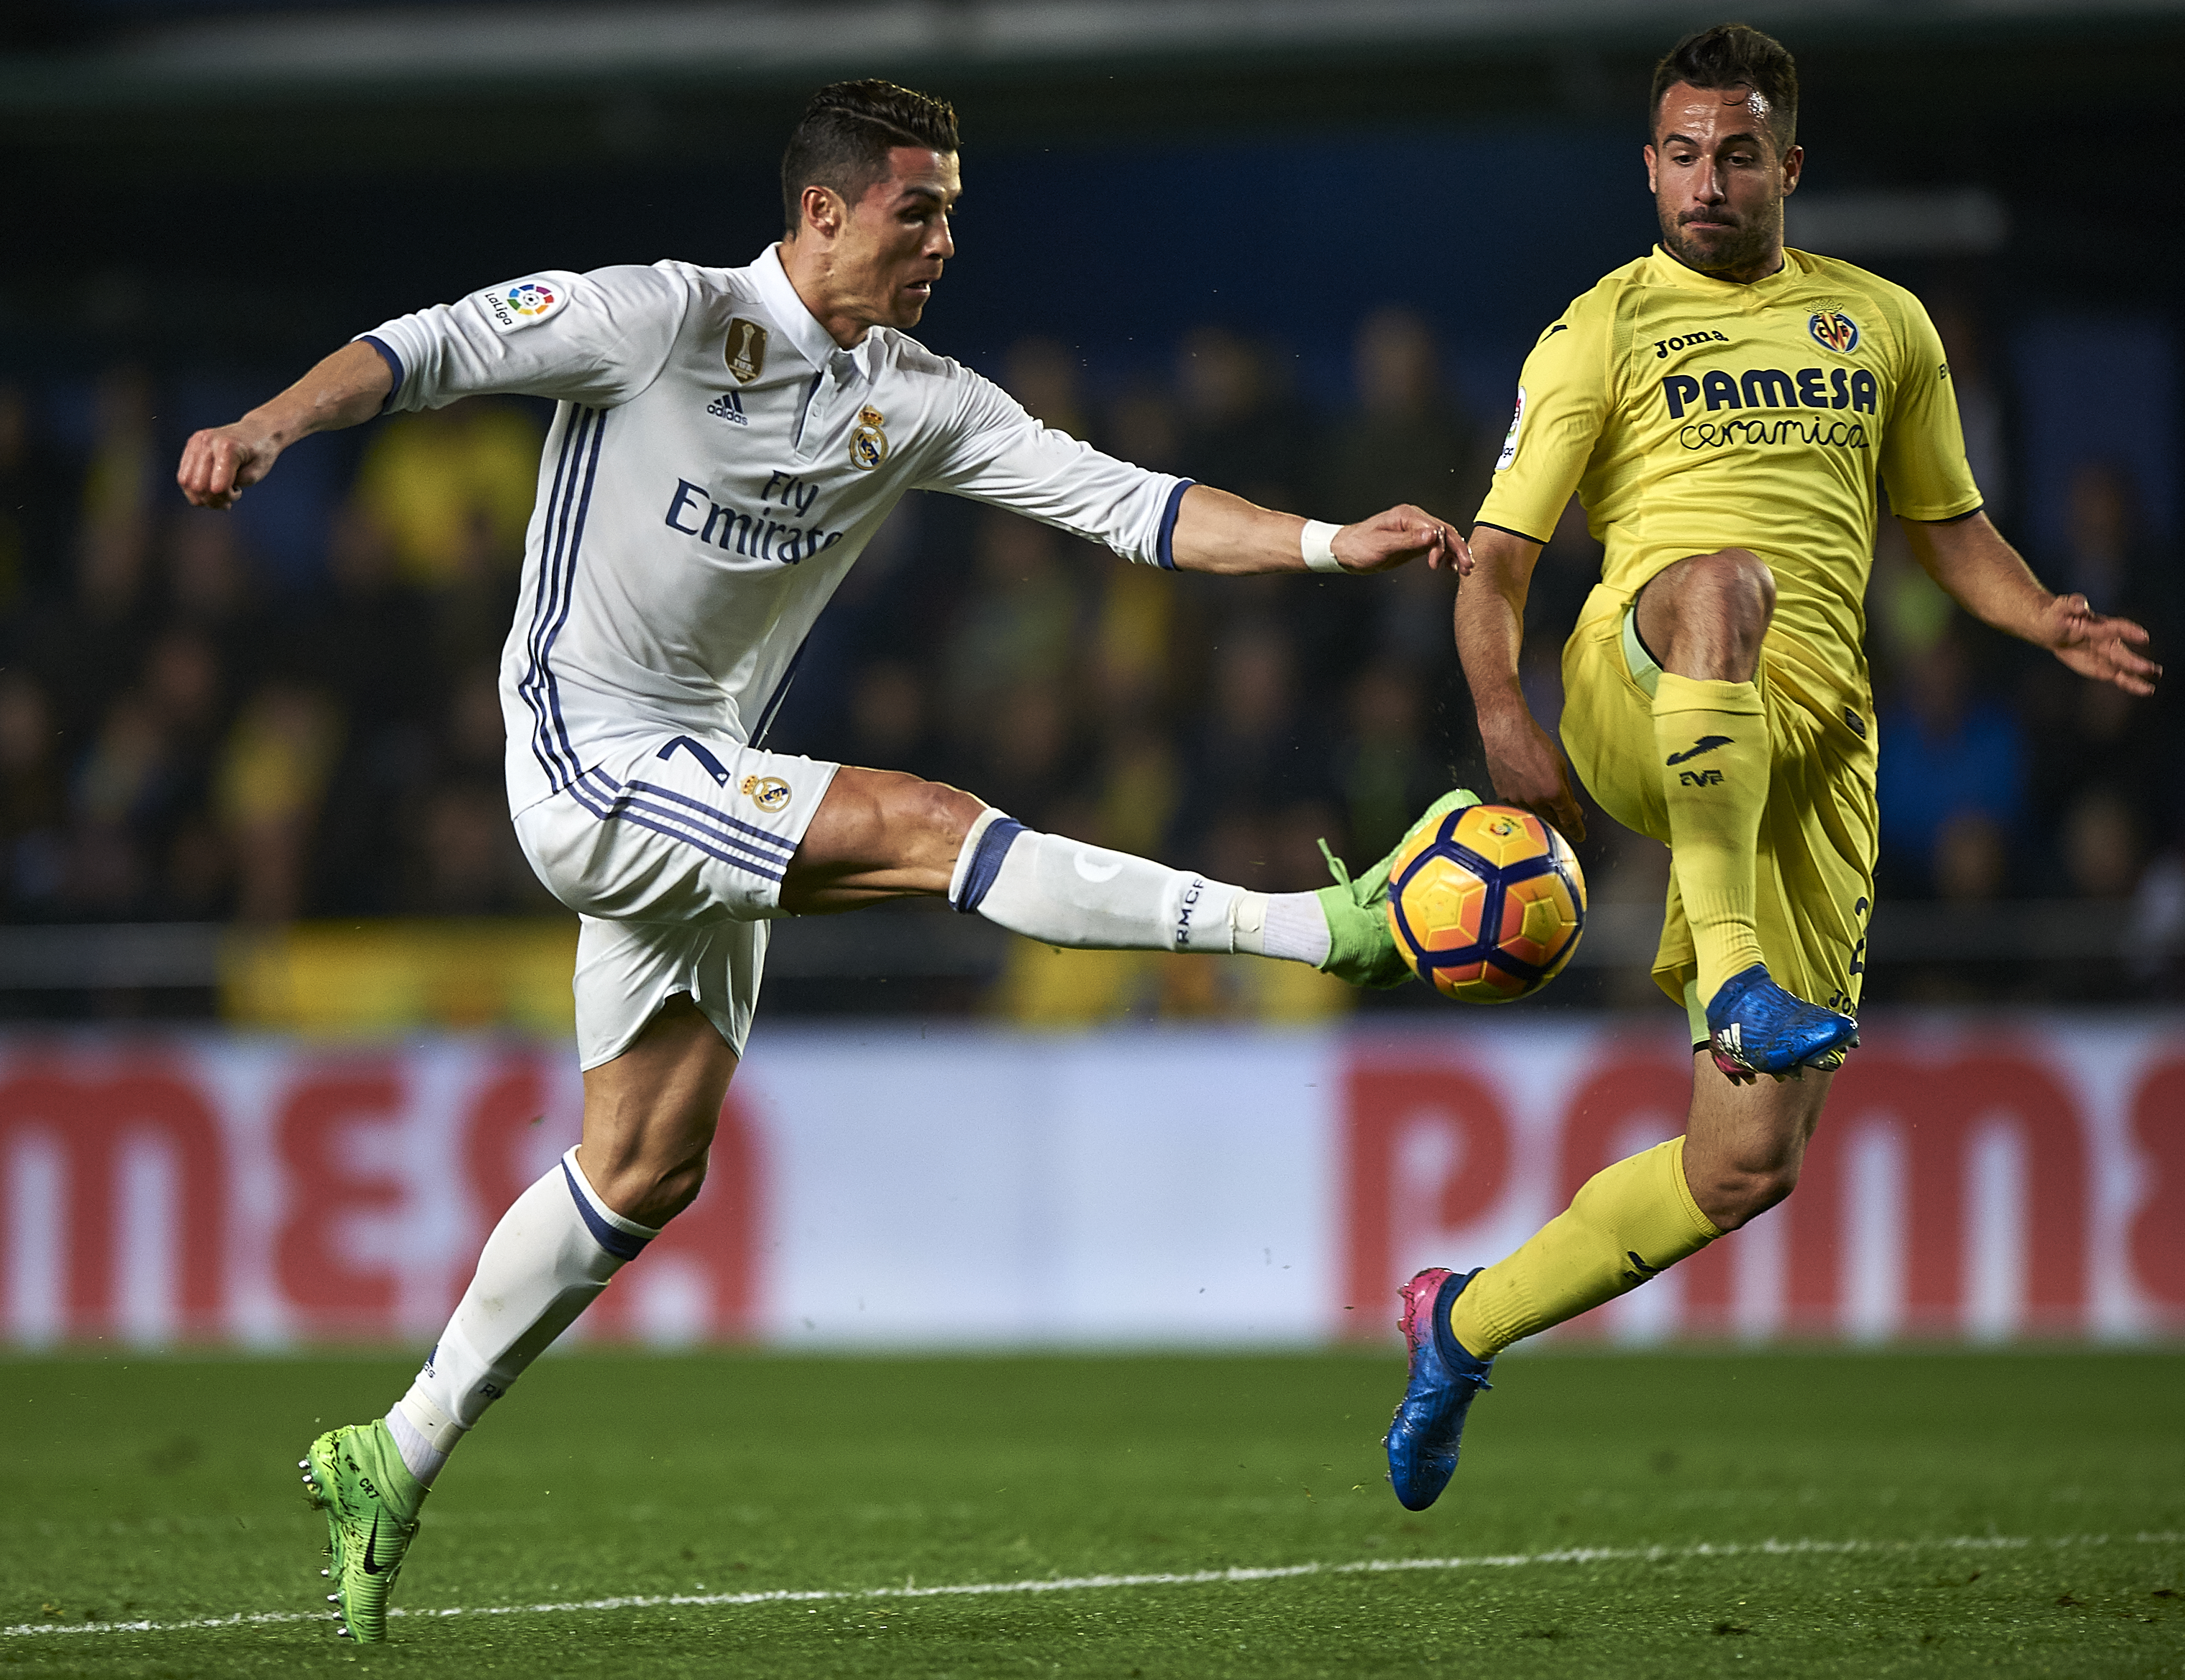 VILLARREAL, SPAIN - FEBRUARY 26:  Mario Gaspar (R) of Villarreal competes for the ball with Cristiano Ronaldo of Real Madrid during the La Liga match between Villarreal CF and Real Madrid at Estadio de la Ceramica on February 26, 2017 in Villarreal, Spain.  (Photo by Fotopress/Getty Images)